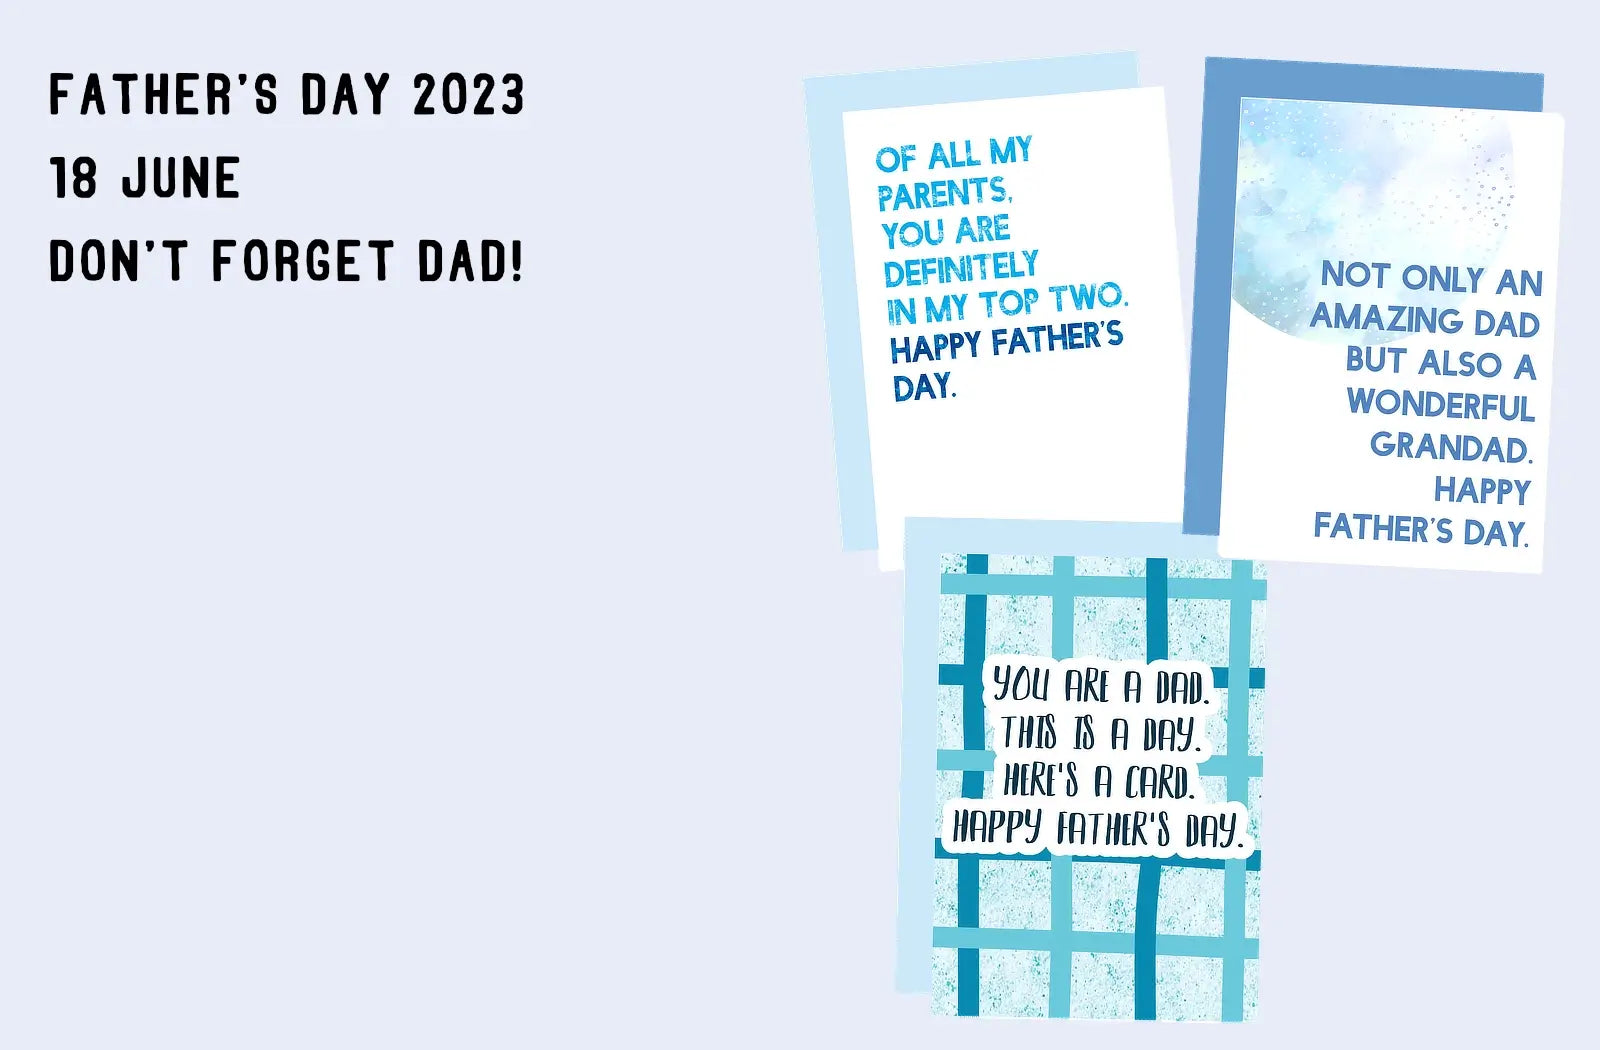 A blue image showing 3 funny Father's Day cards, including one for a grandad.  A reminder that Father's Day is 18th June this year in black font